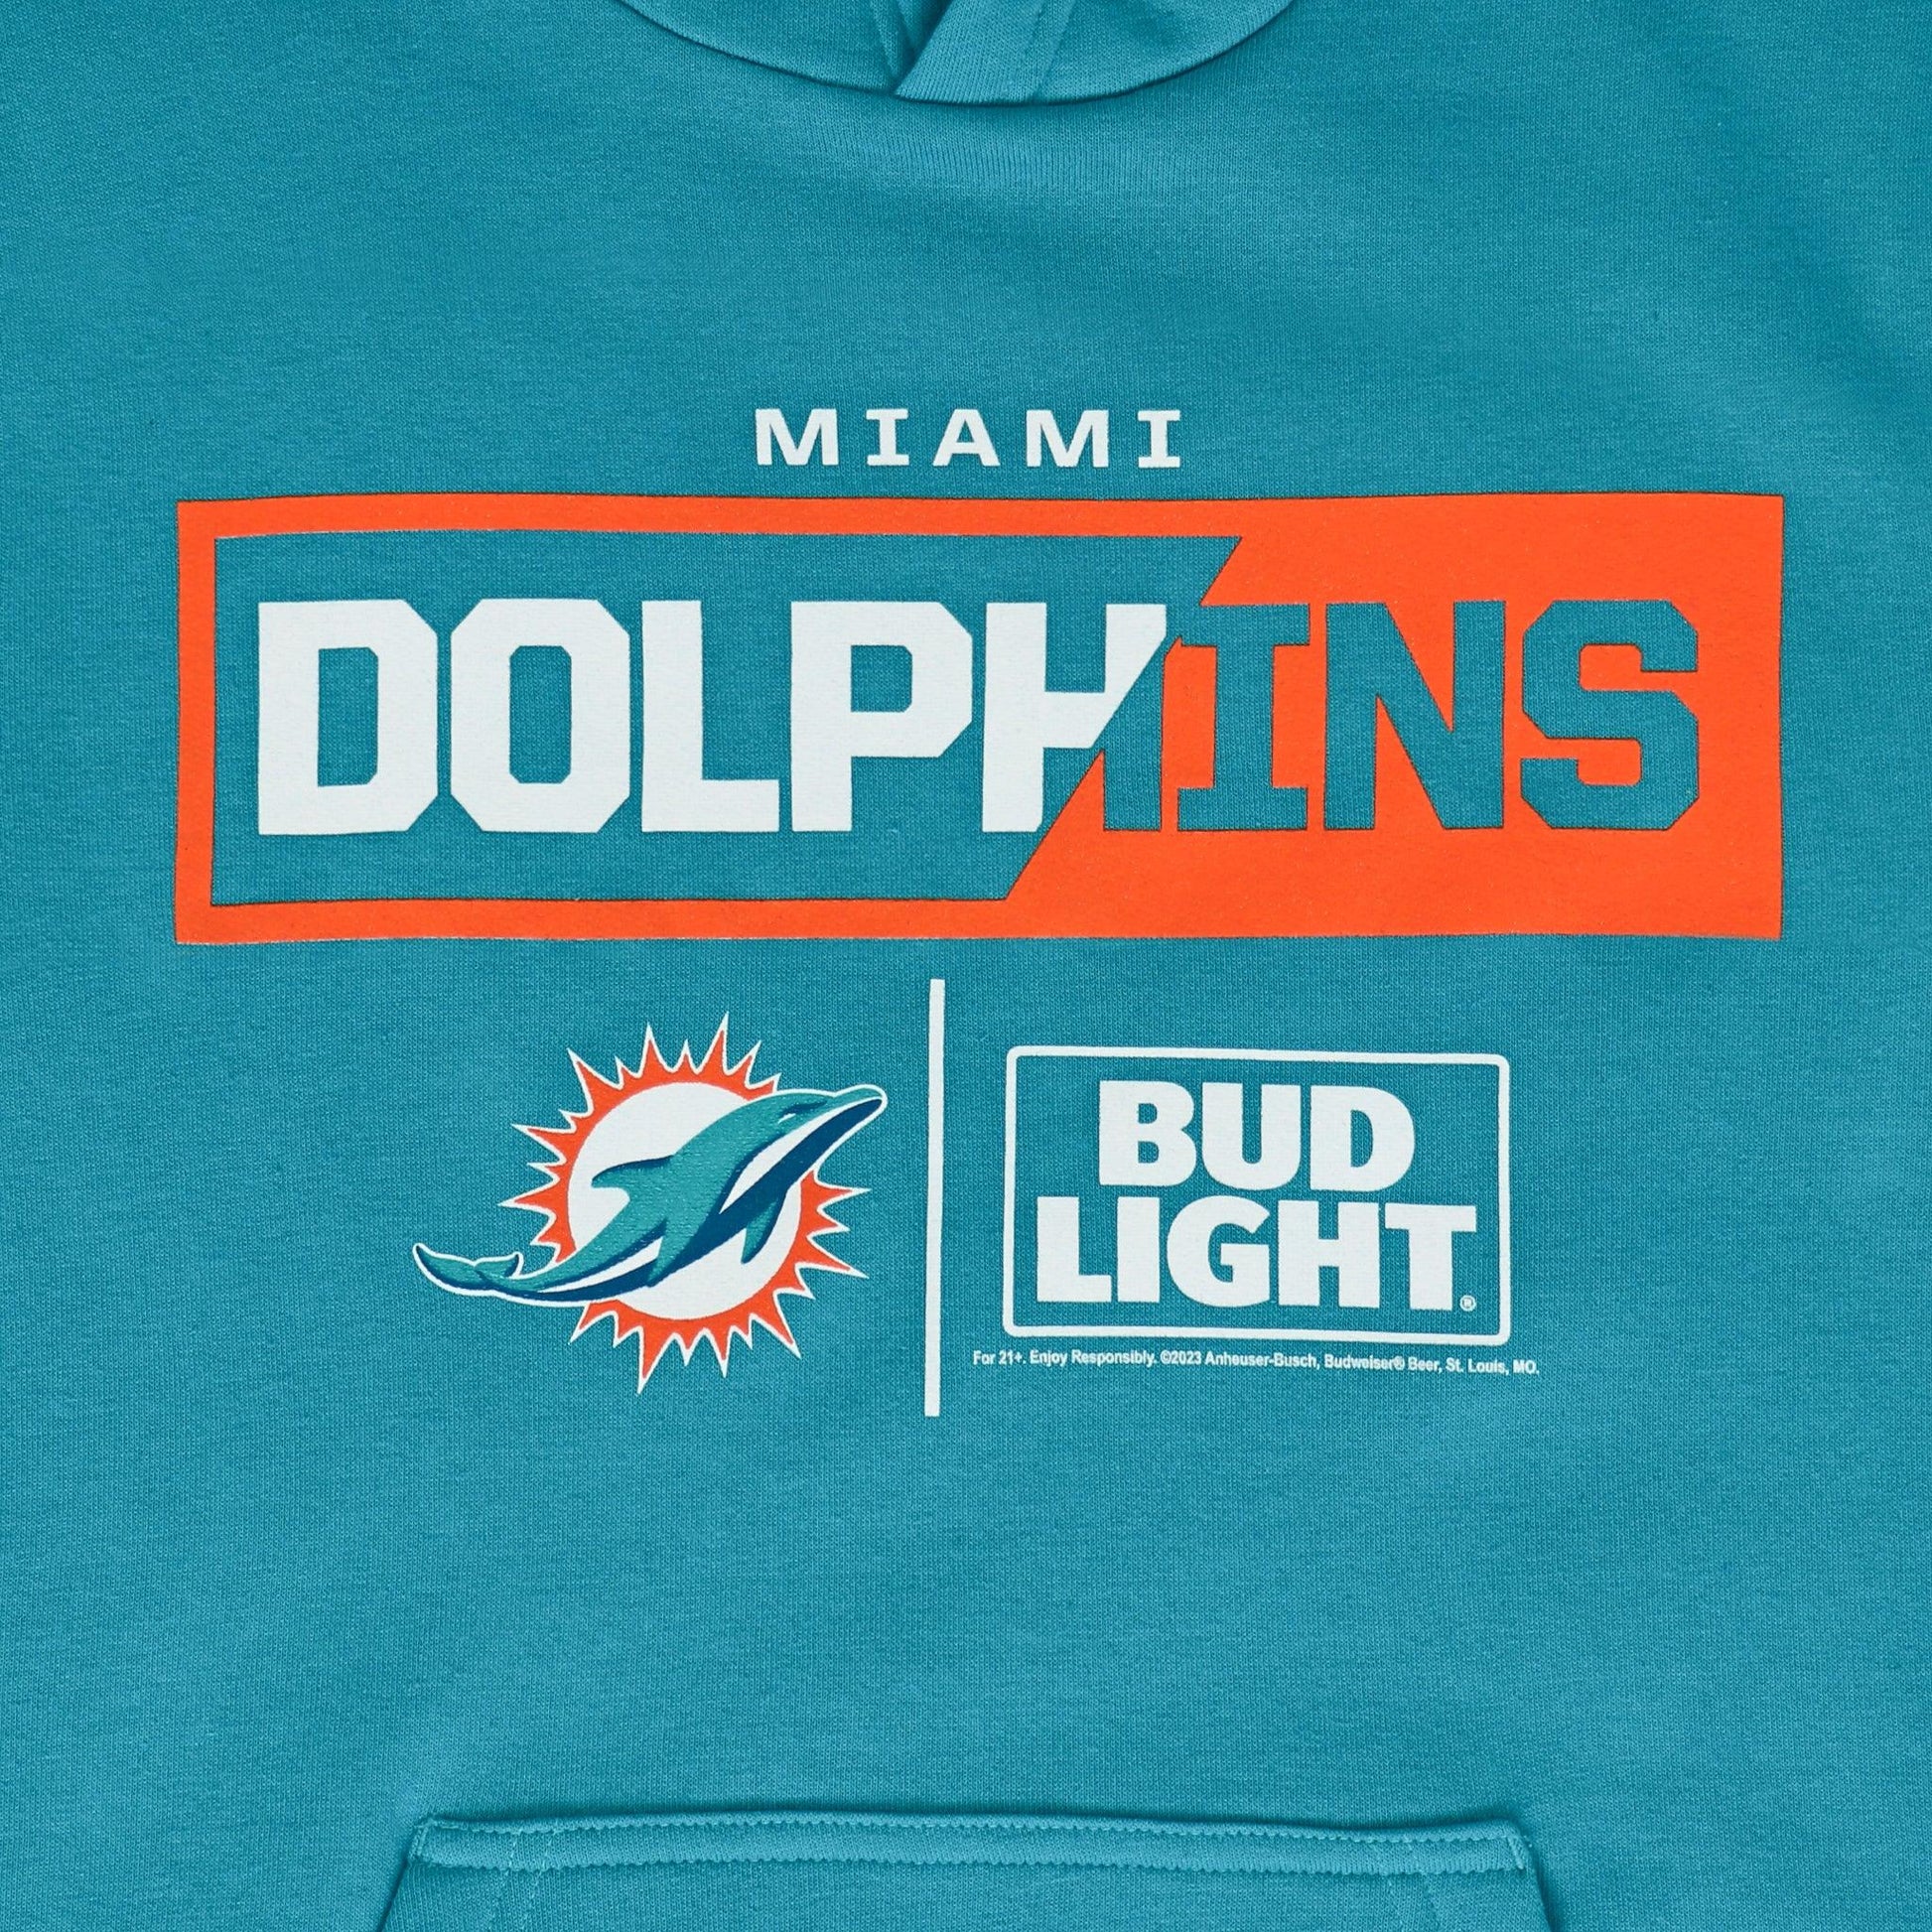 detail of bud light and dolphins logo